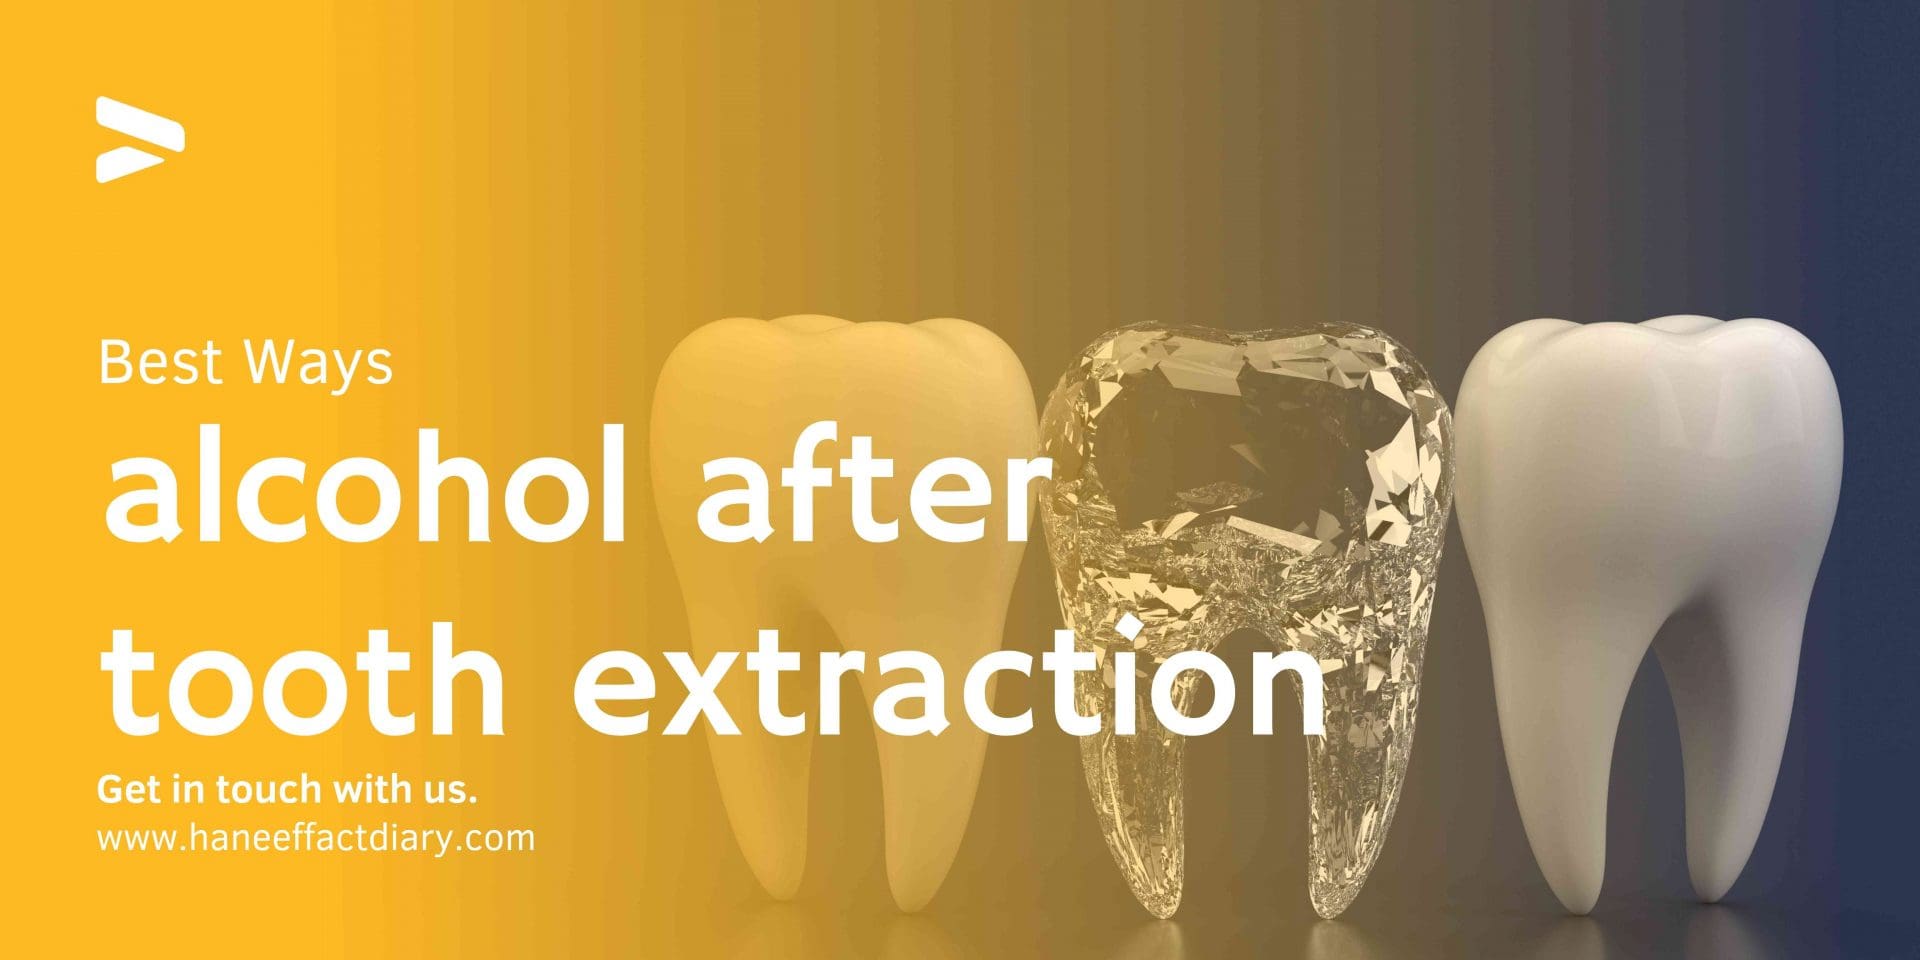 Best Ways alcohol after tooth extraction 2022